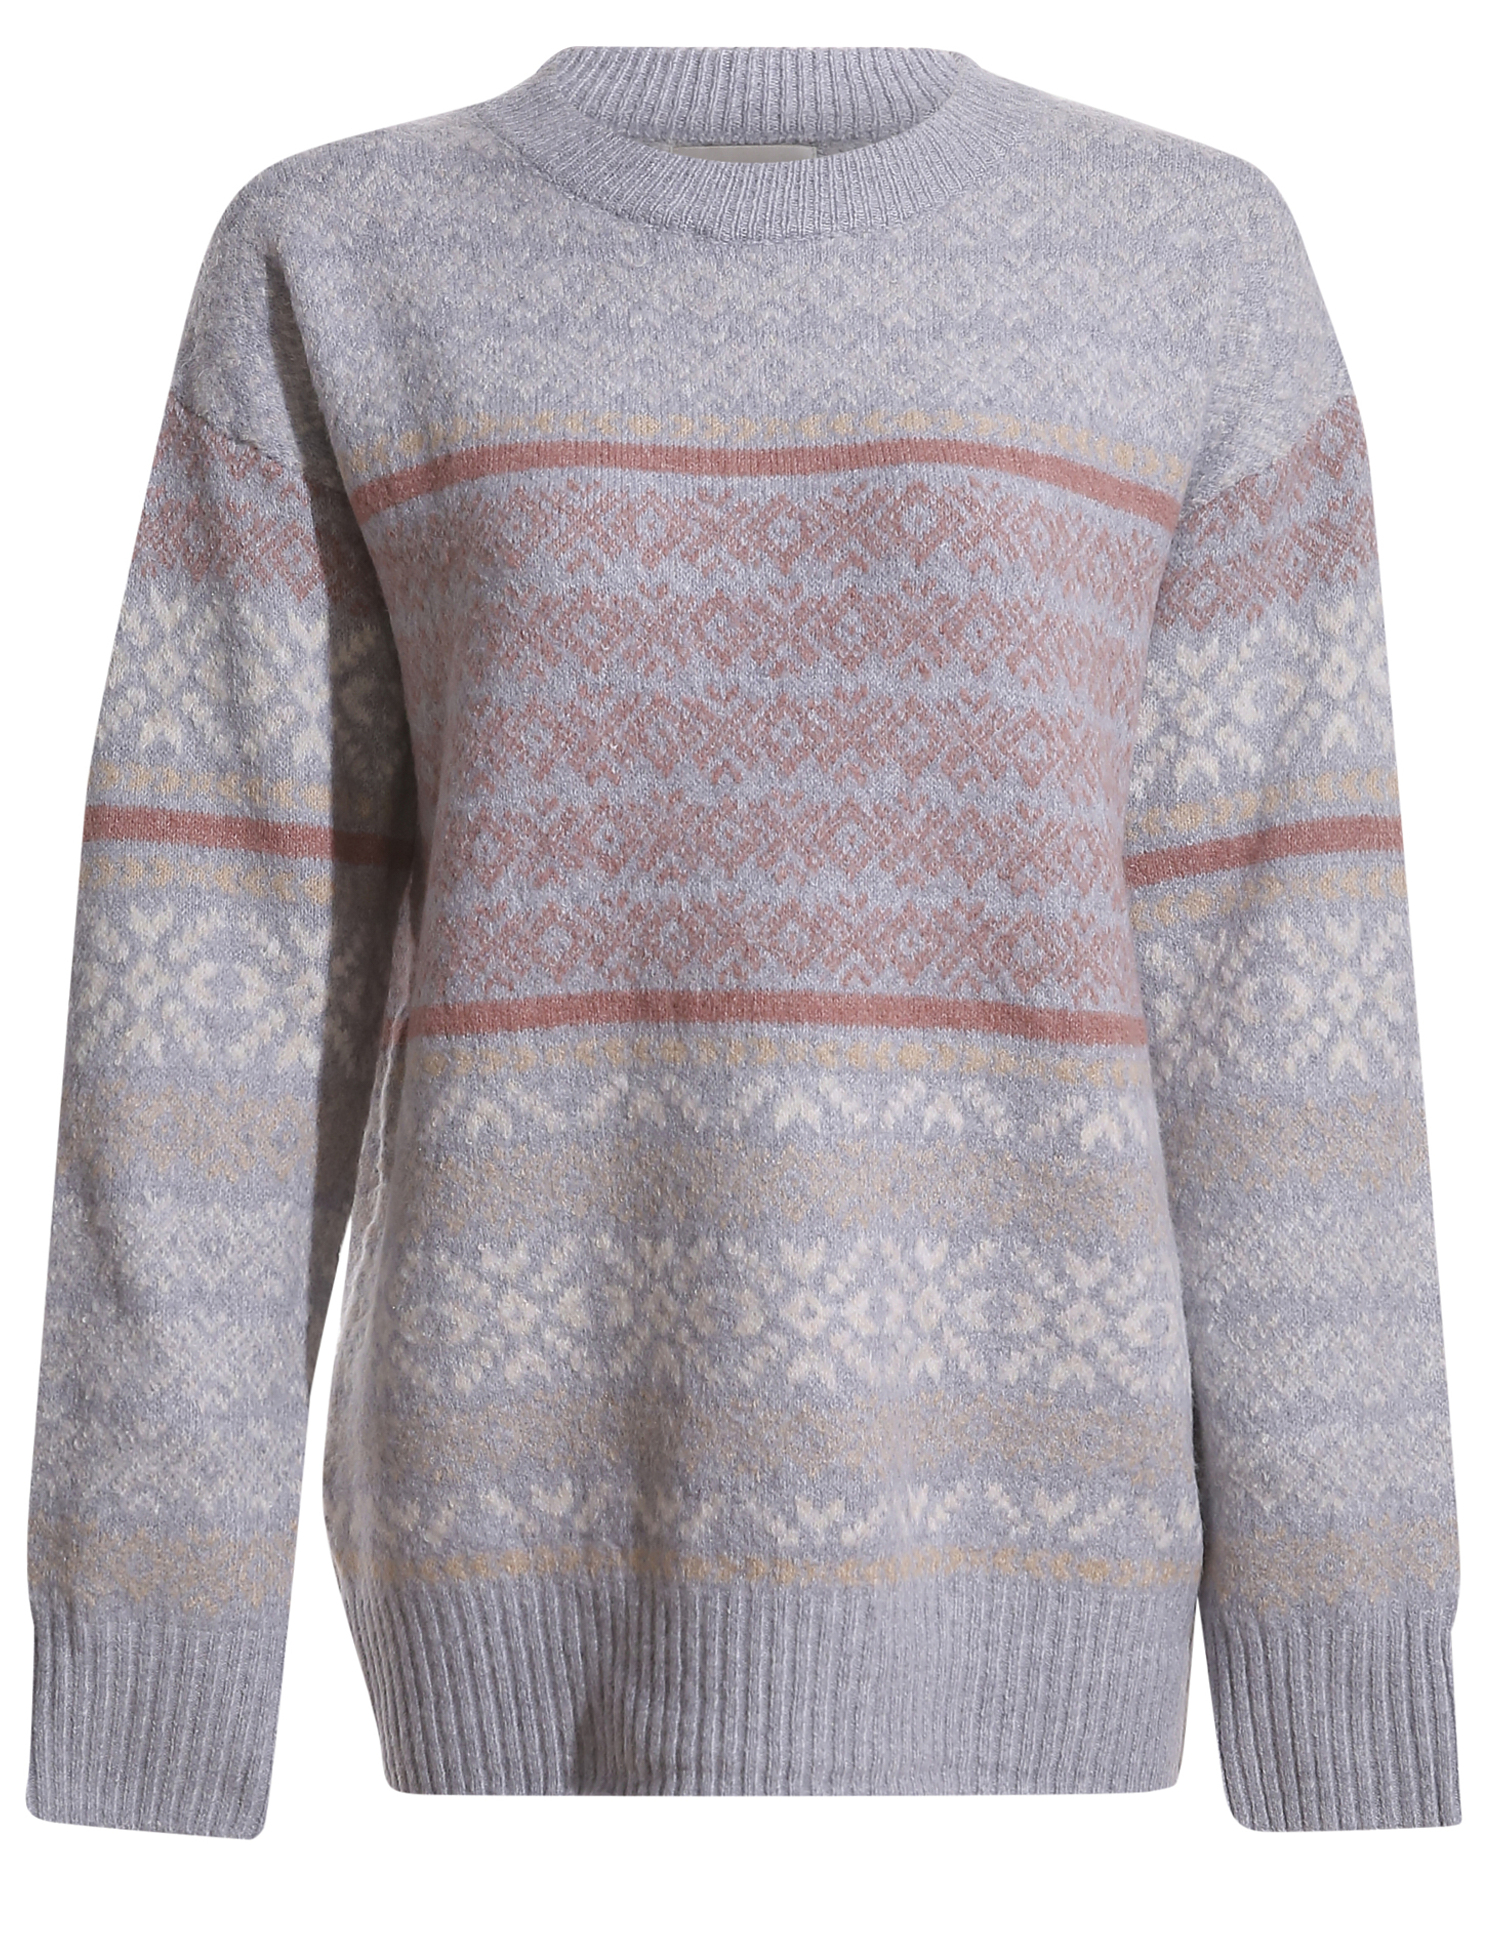 Novelty Multi-Colored Printed Sweater